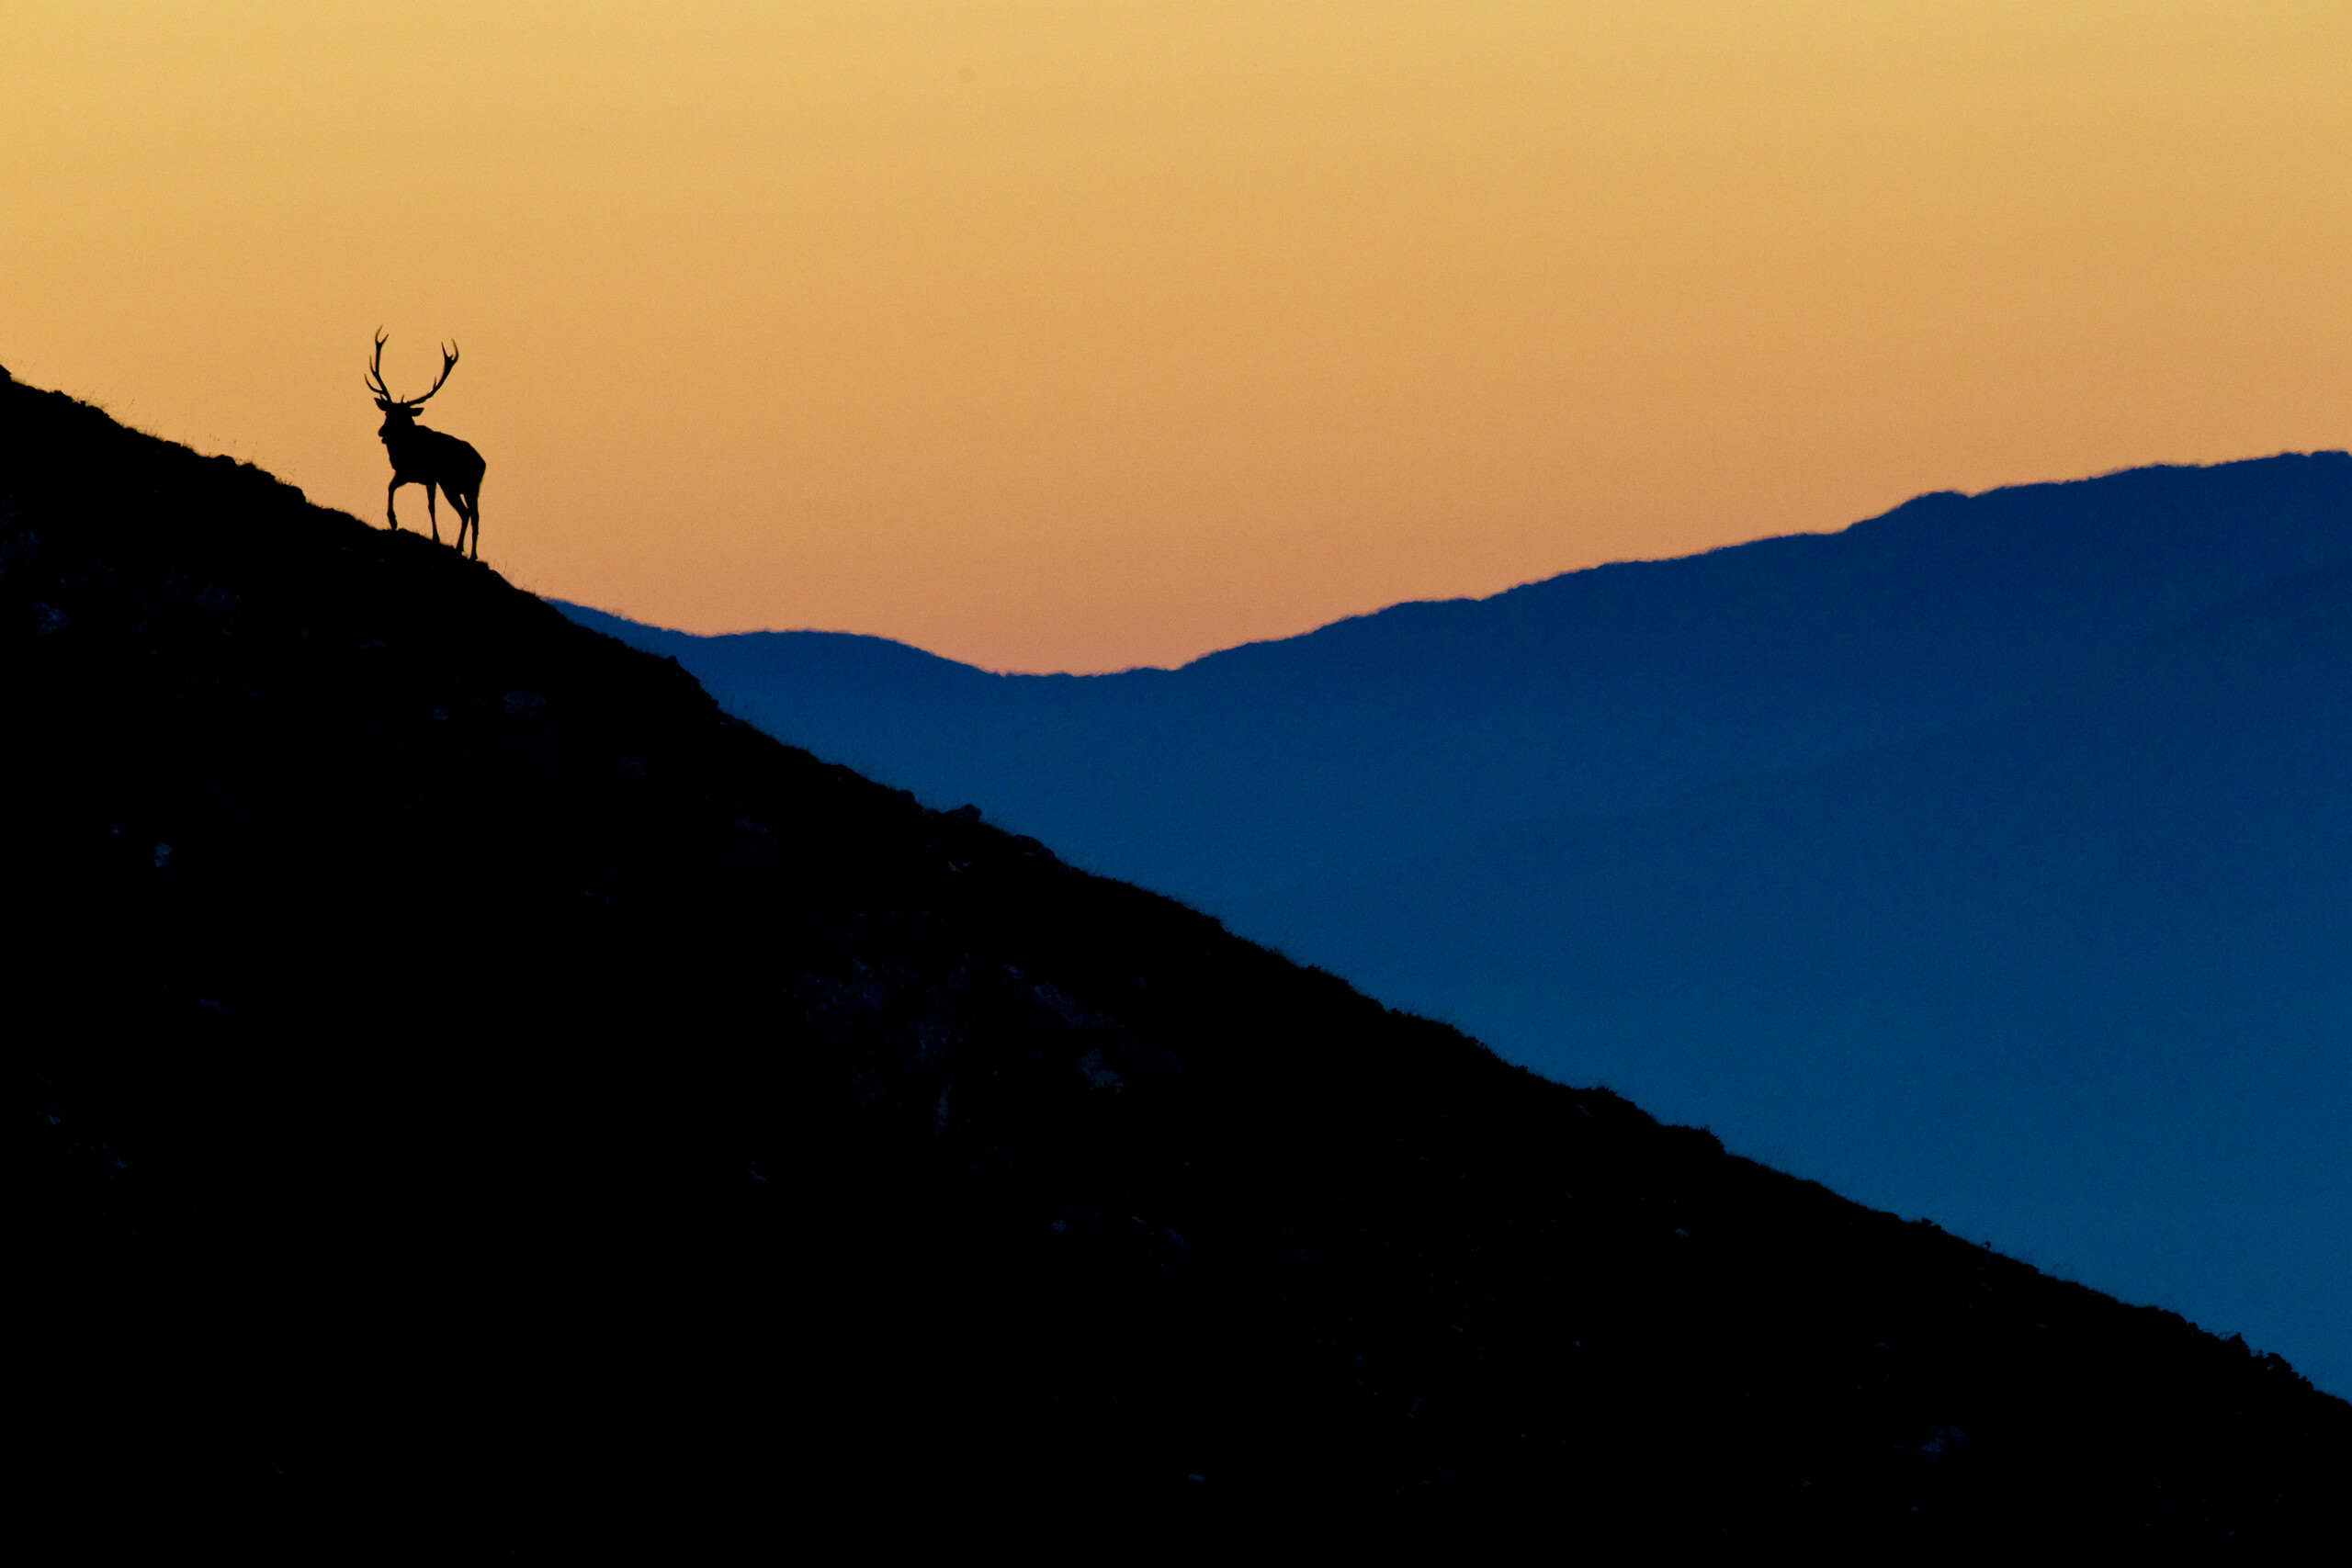 Red deer (Cervus elaphus) stag on mountain slope at sunrise. Abruzzo, Central Apennines, Italy. Oct 2012